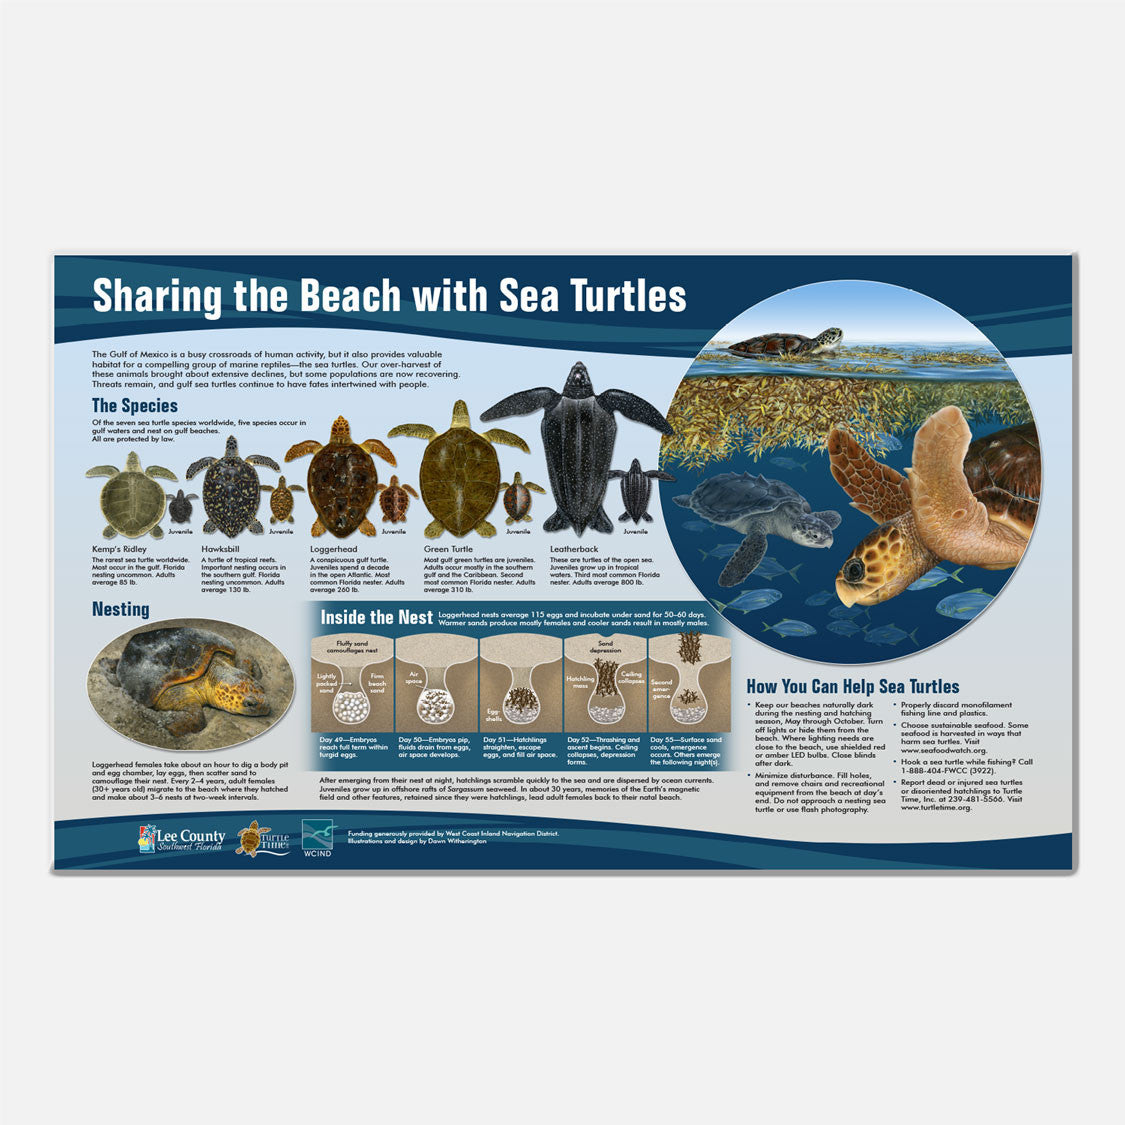 This beautifully illustrated display about Florida's five species of sea turtles is accurate in detail.